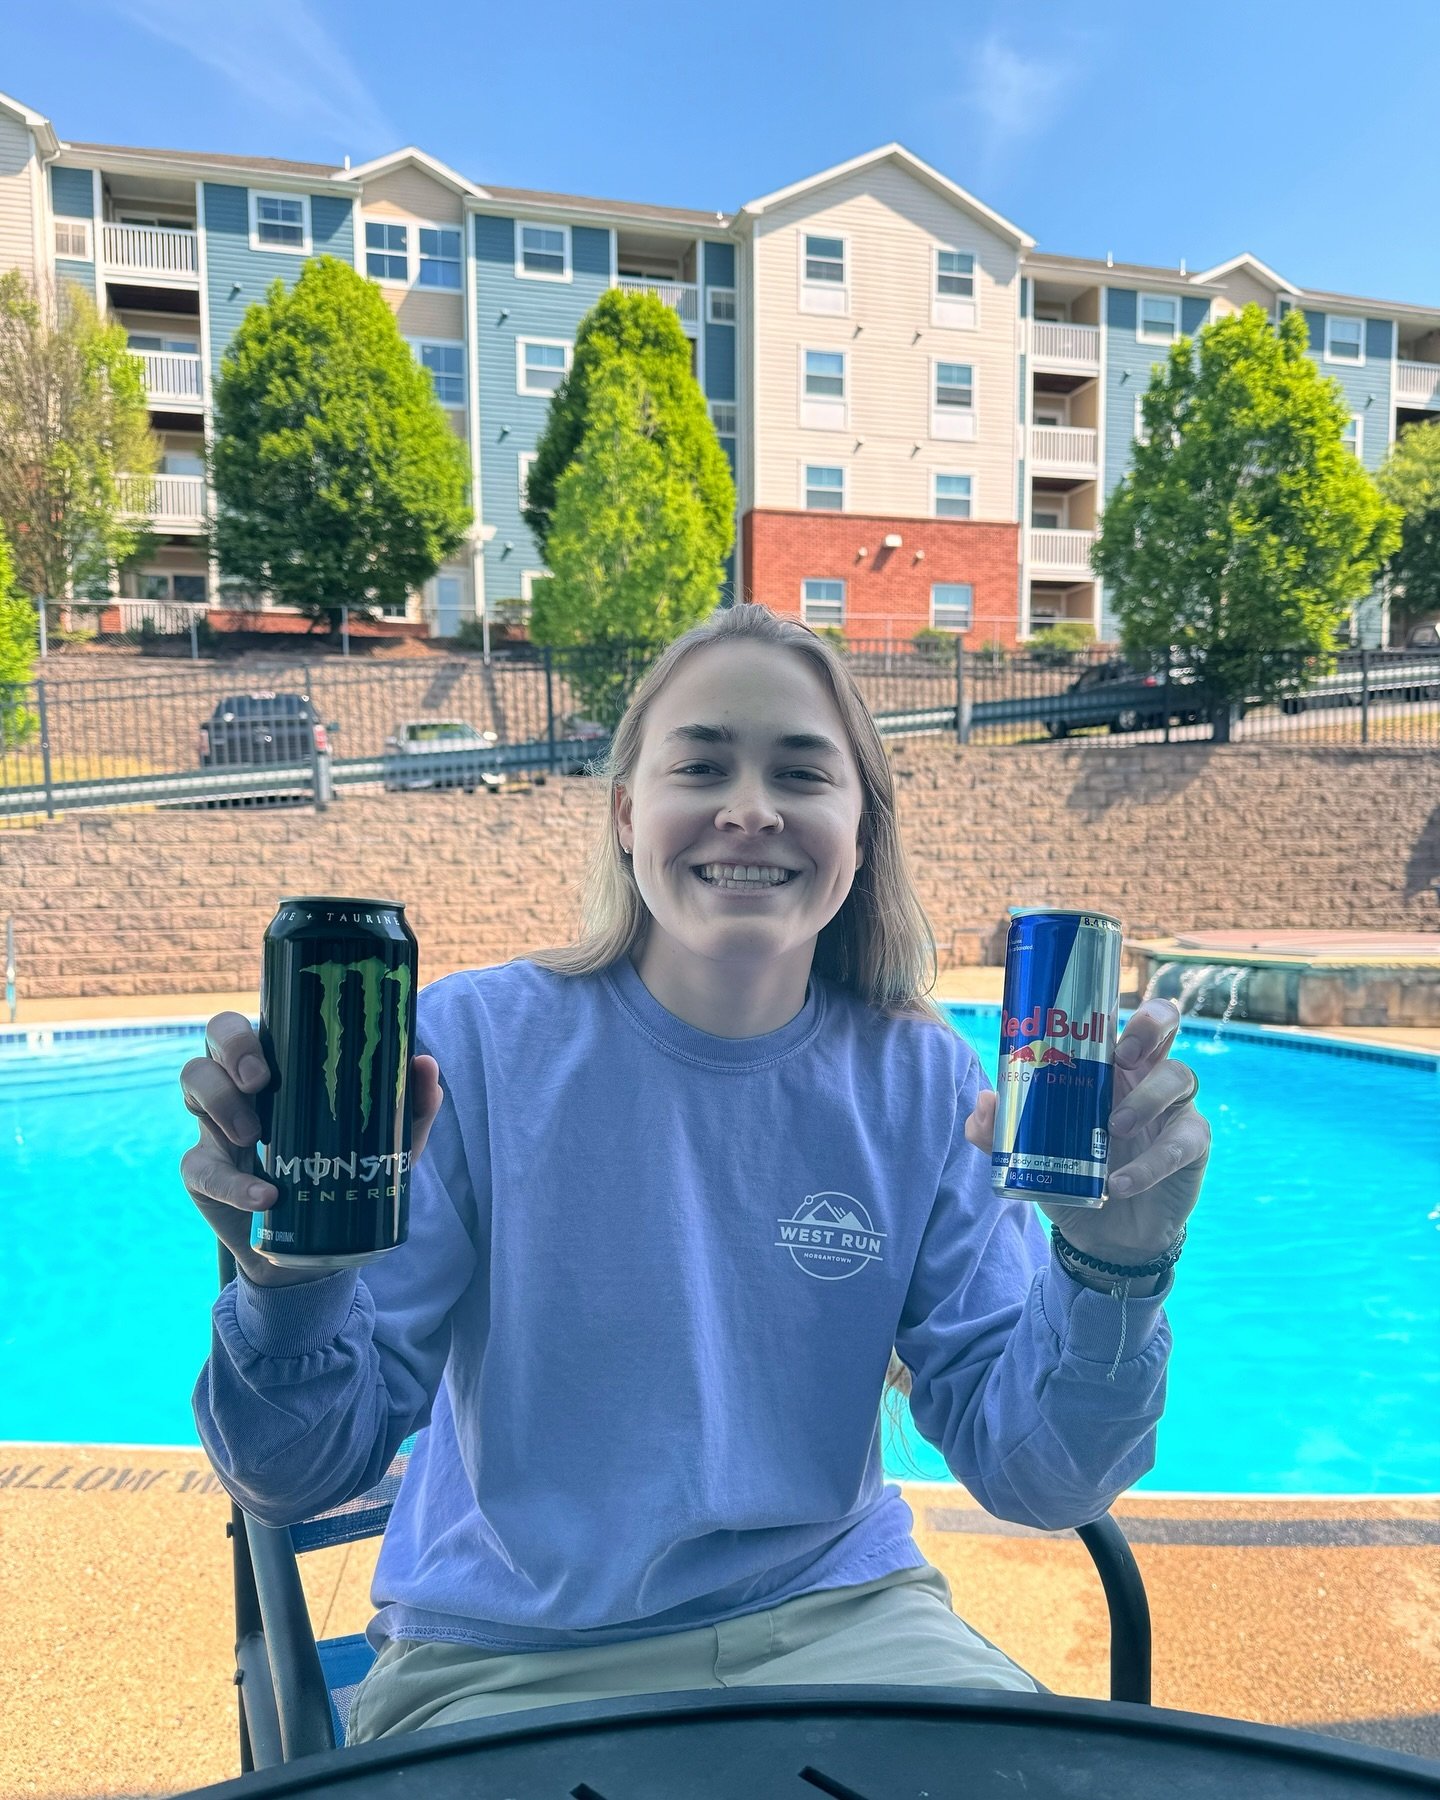 Fuel up for finals week! Stop by the club house to grab an energy drink on us!😎